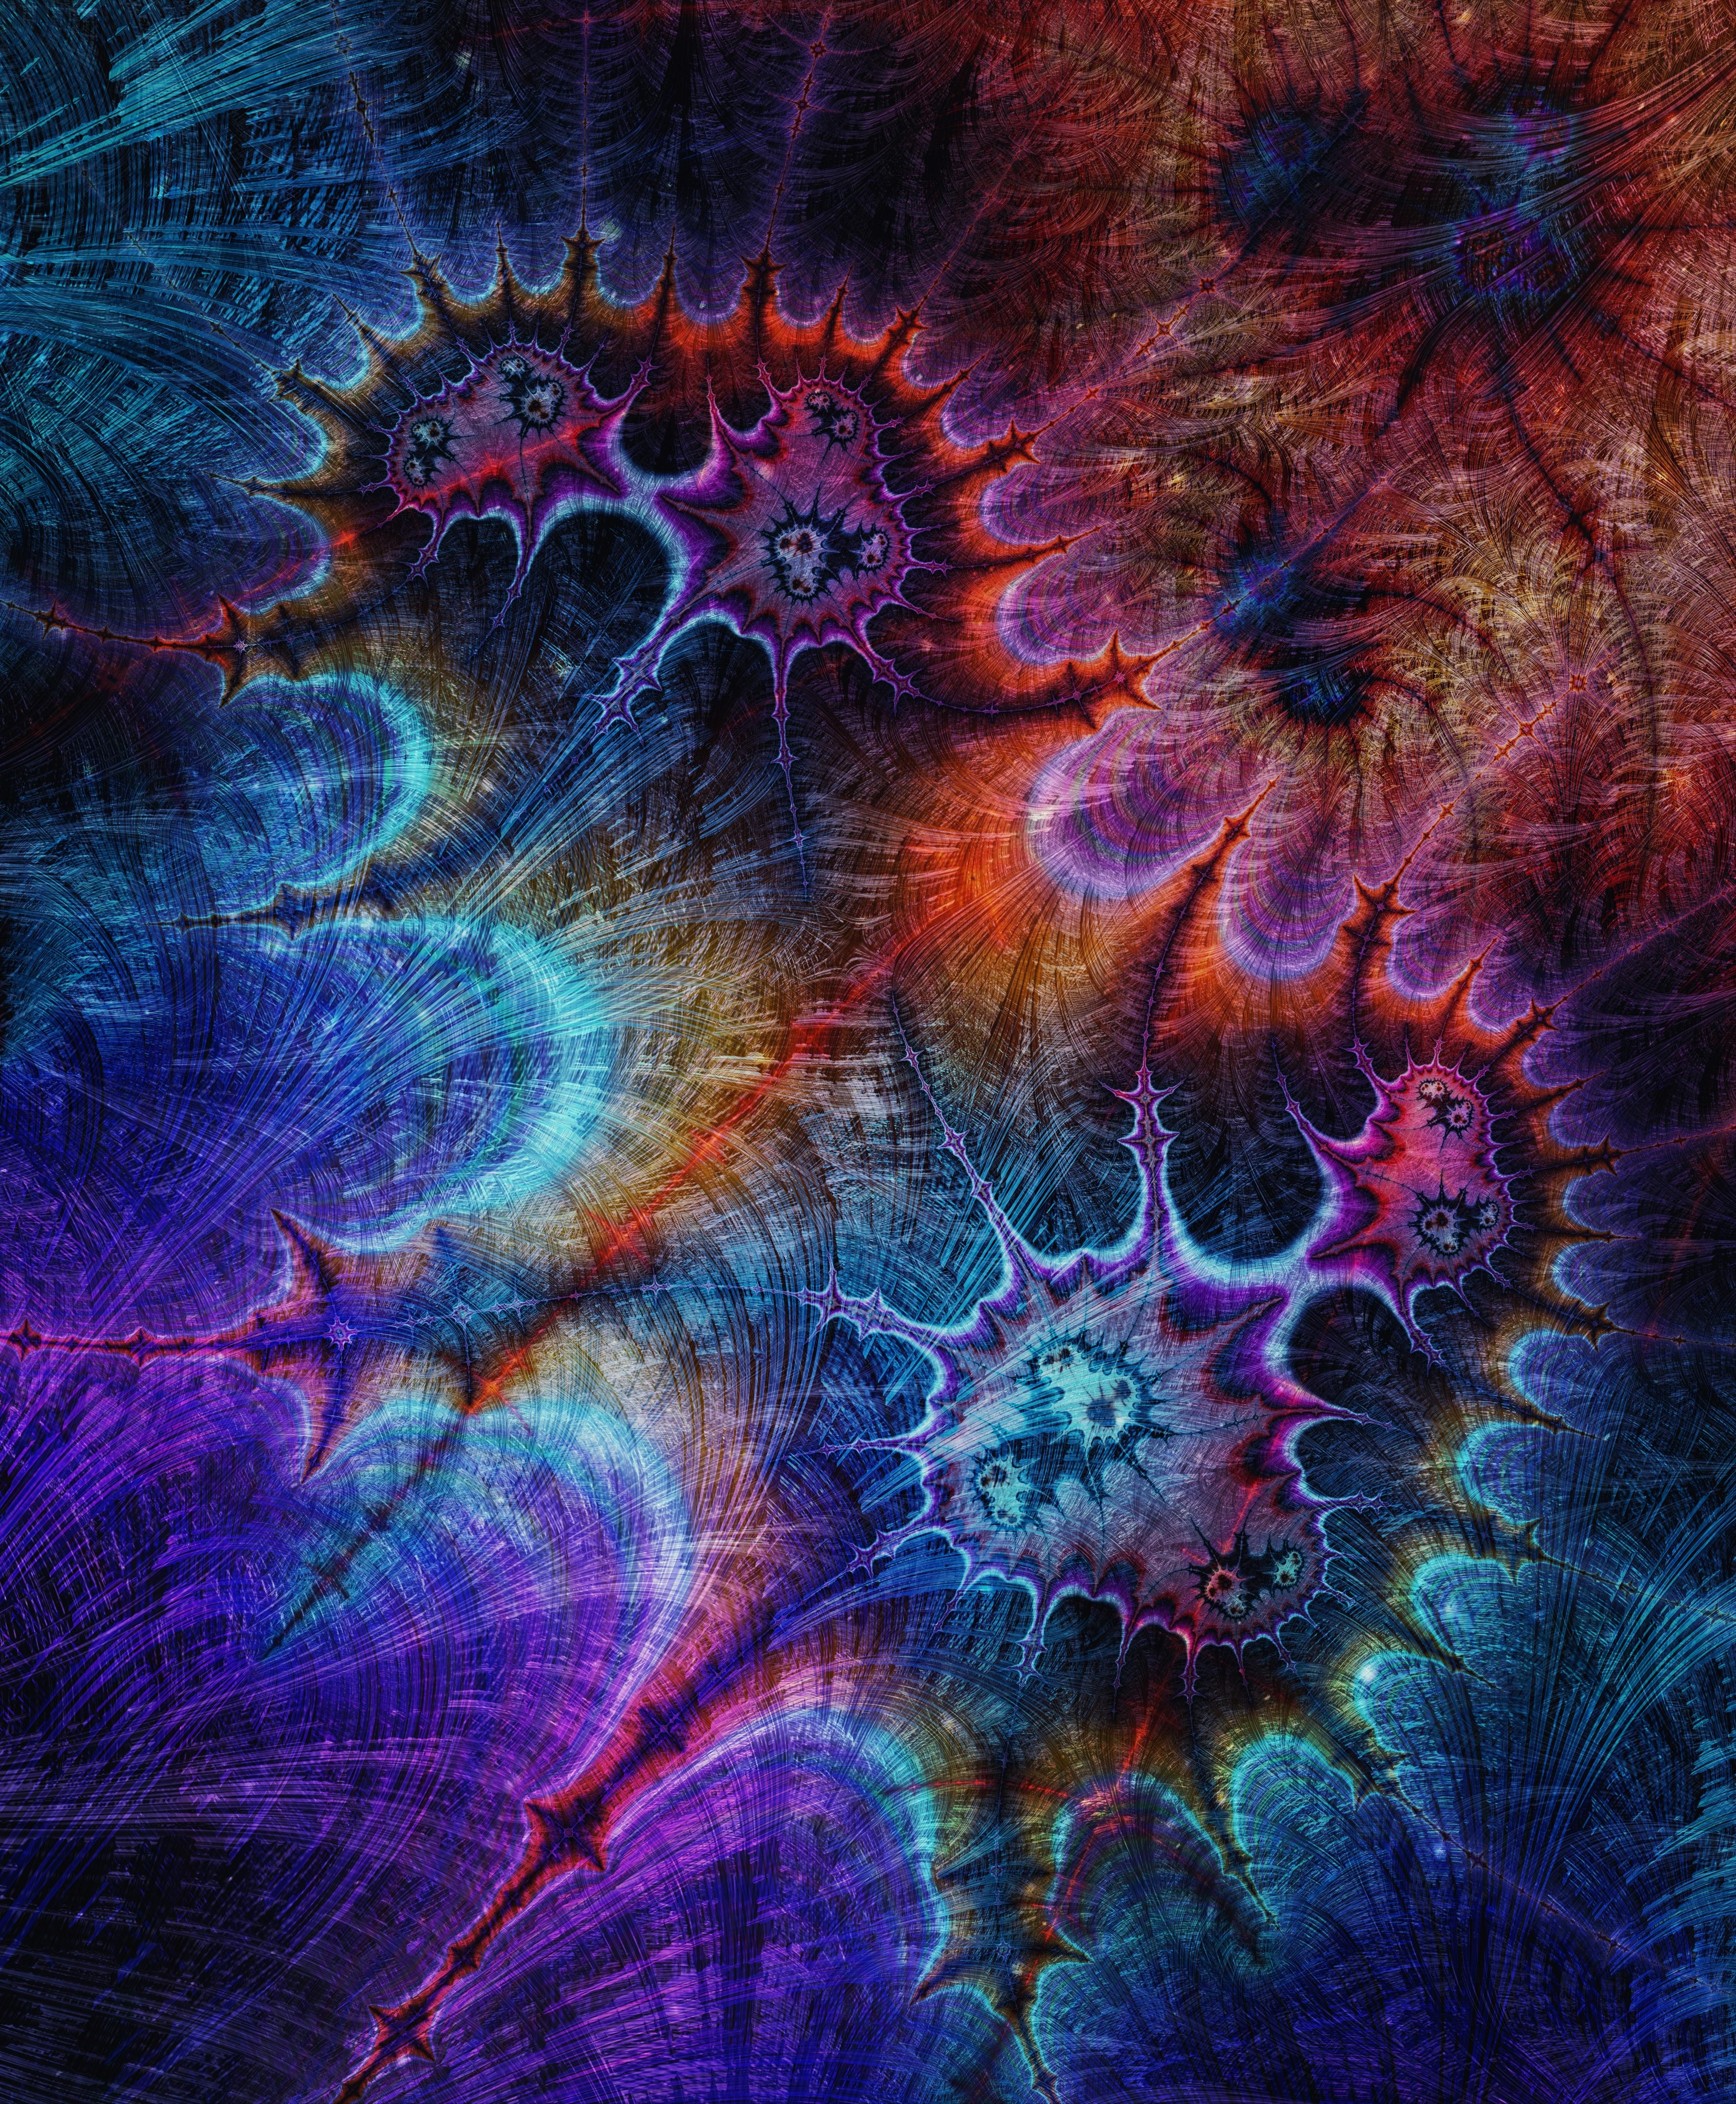 Psychedelic Wallpaper Images  Free Download on Freepik